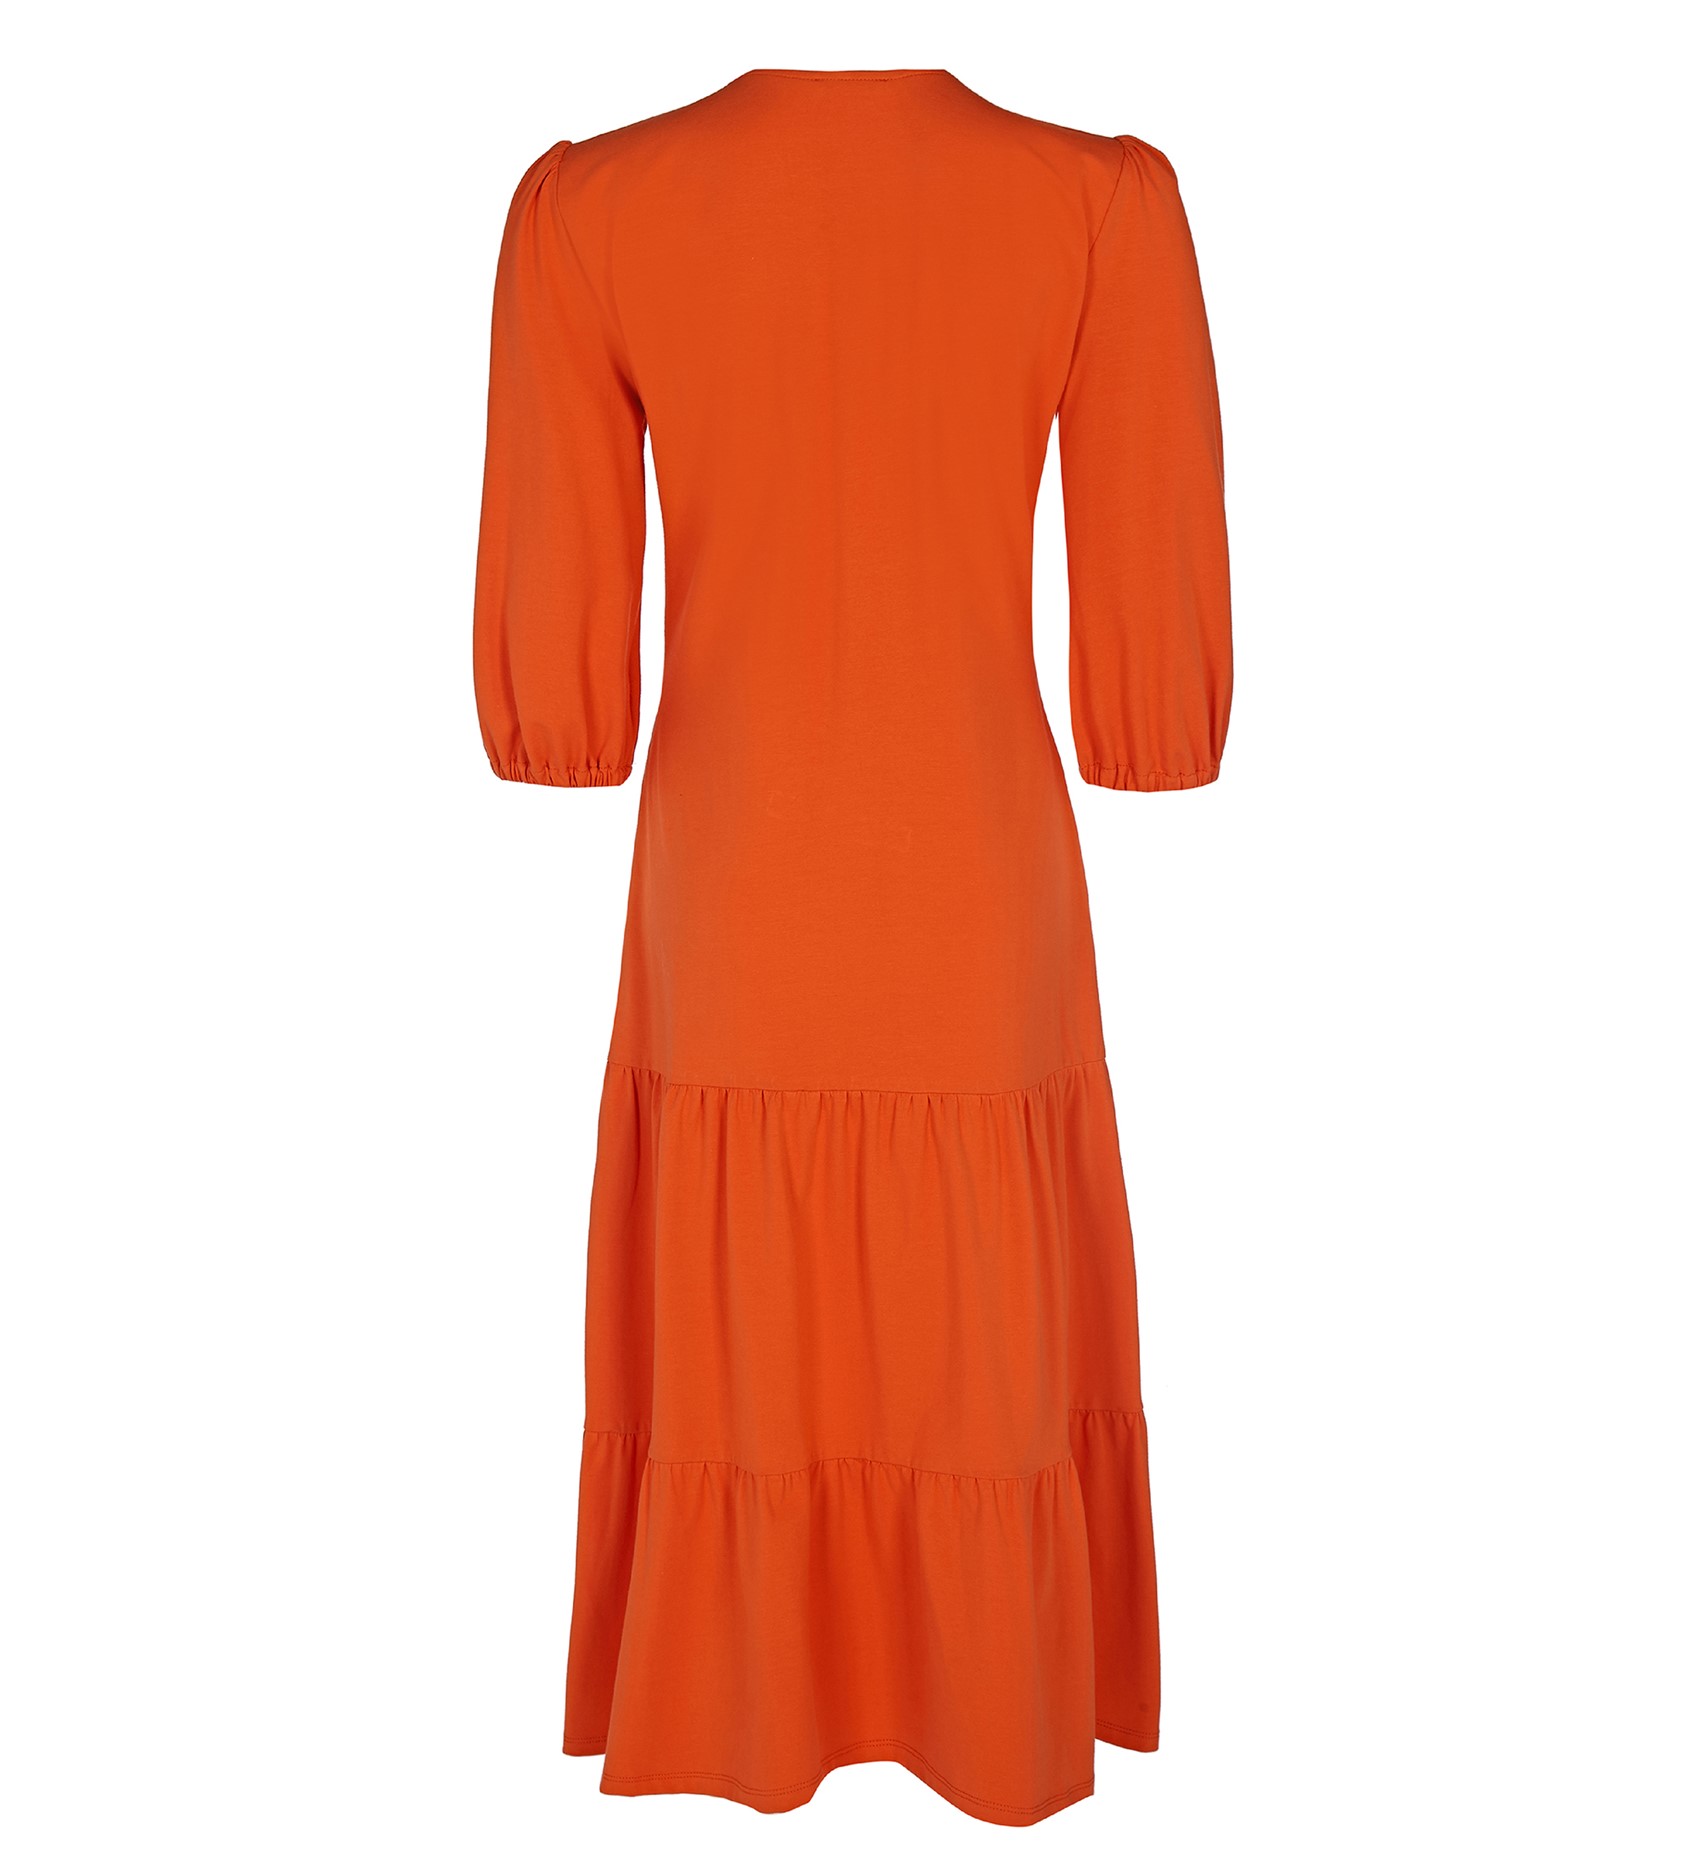 Cotton Fit/Flare Dress in Orange with Tiered Detailing | Finery London